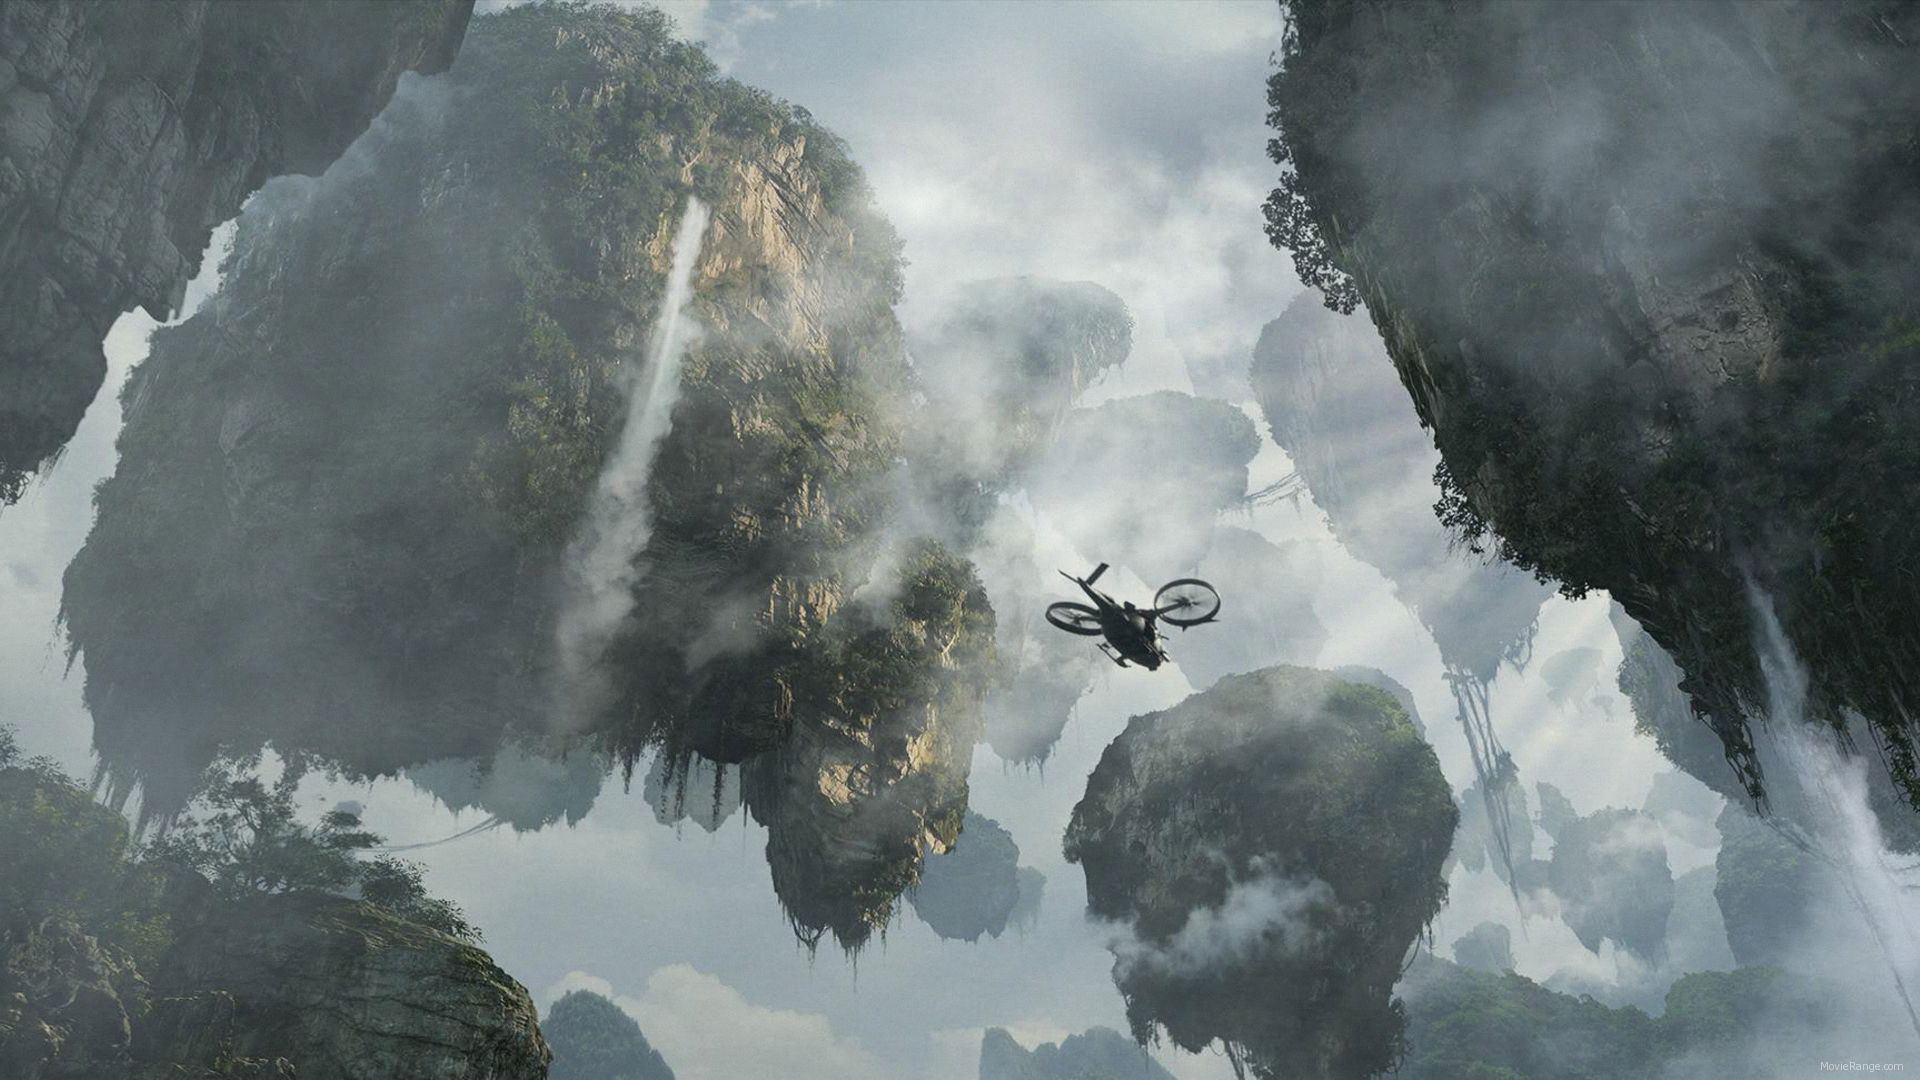 avatar, movie, cloud, floating island, helicopter, nature, skyline download HD wallpaper